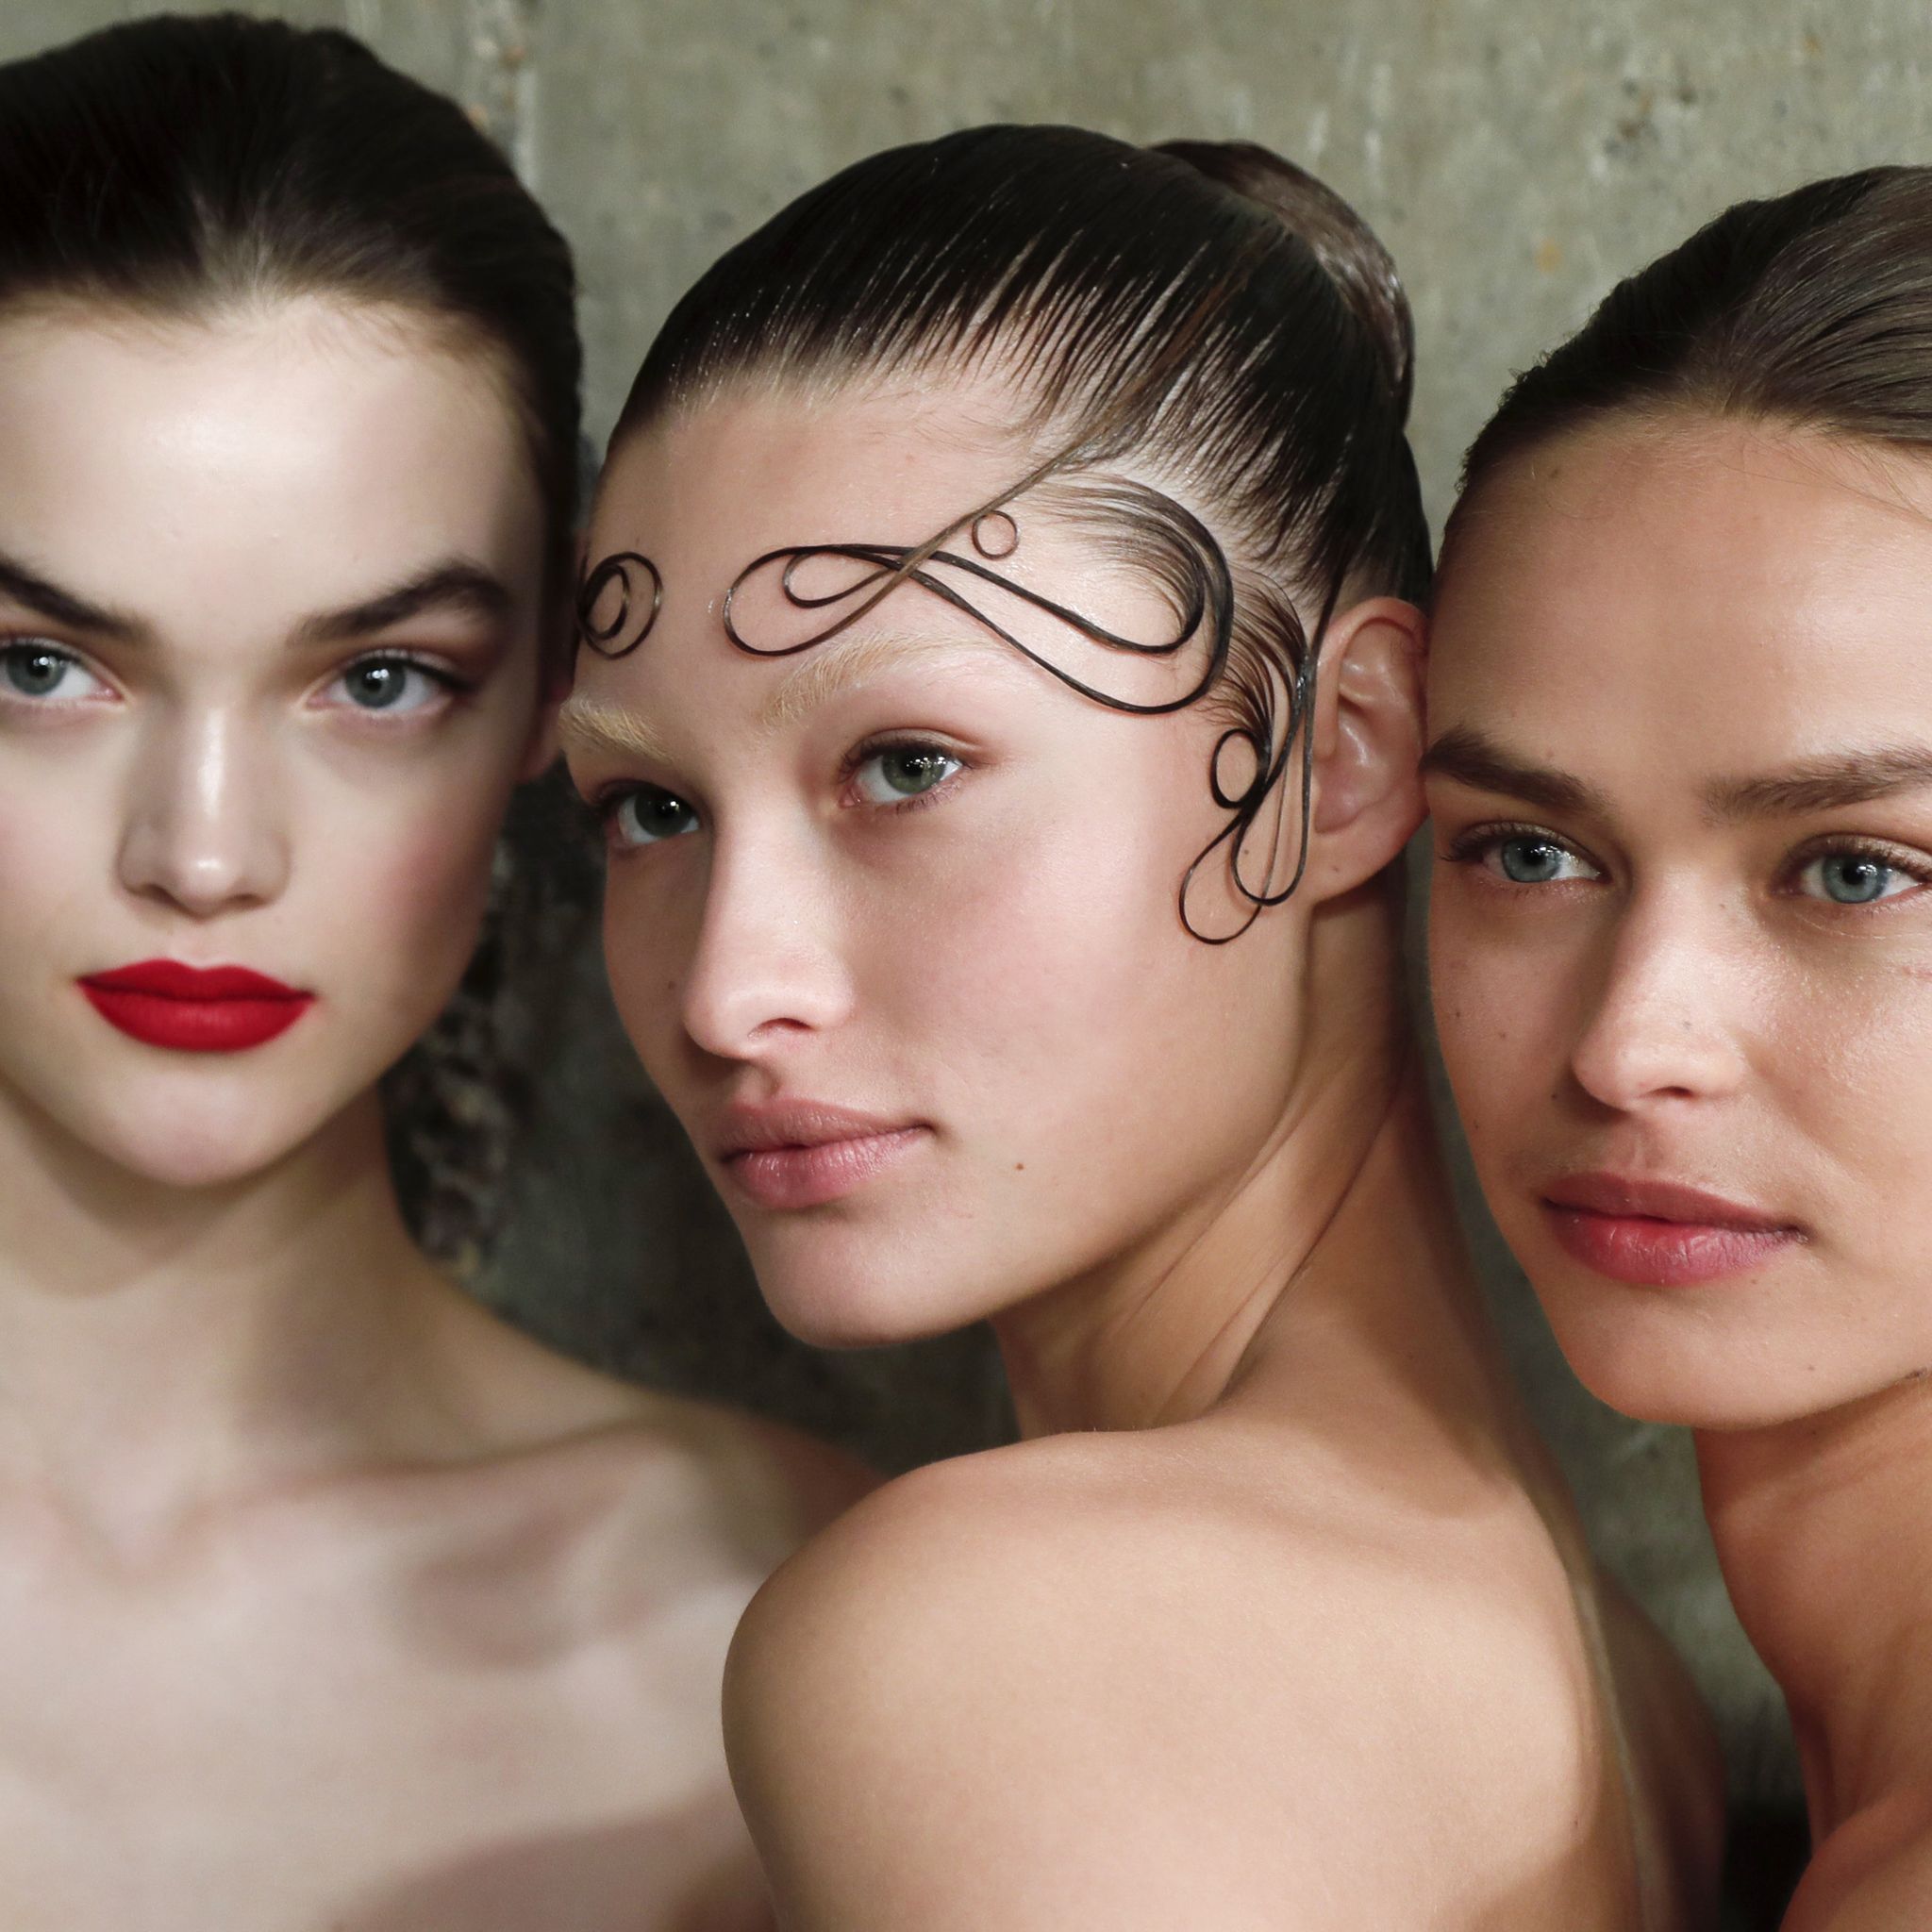 Wet Look Hair Gave Fendi's Y2K-Inspired Collection a Modern Twist